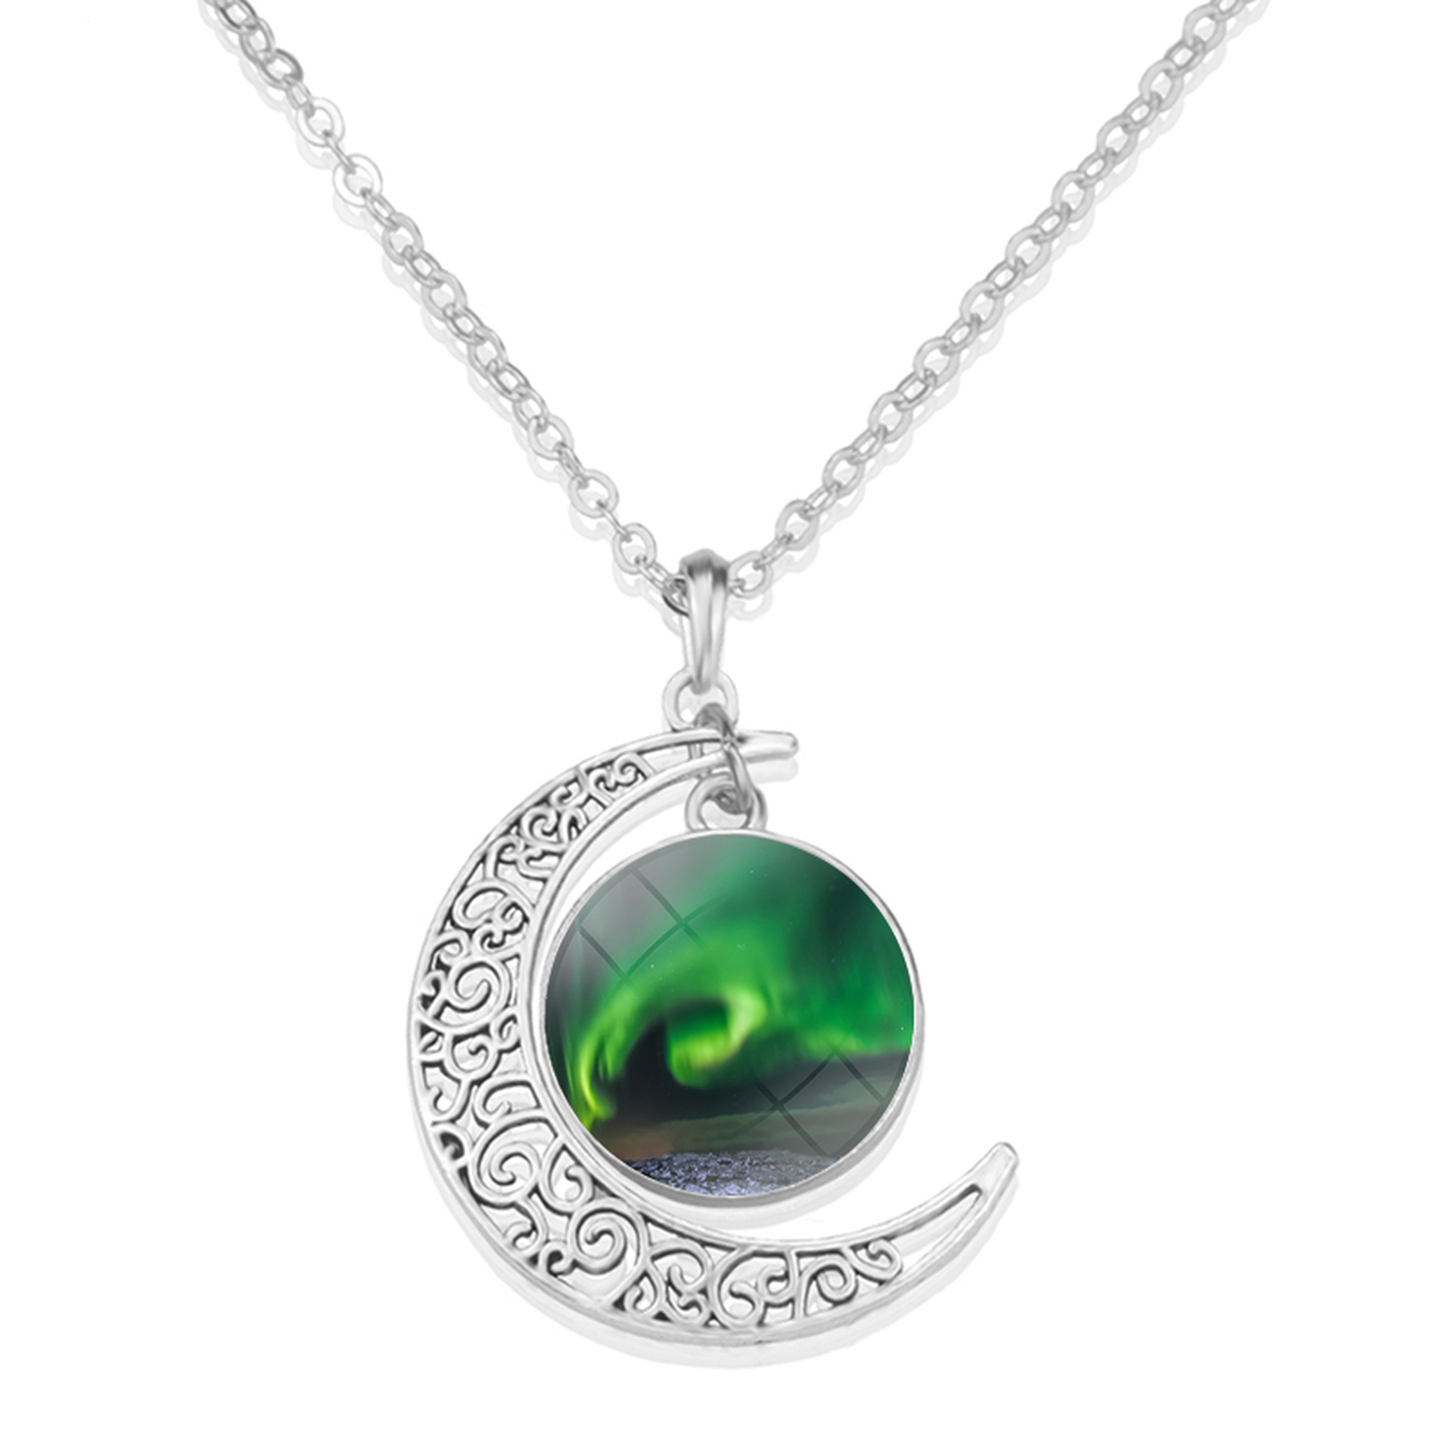 Unique Aurora Borealis Crescent Necklace - Northern Light Jewelry - Crescent Glass Cabochon Pendent Necklace - Perfect Aurora Lovers Gift 14